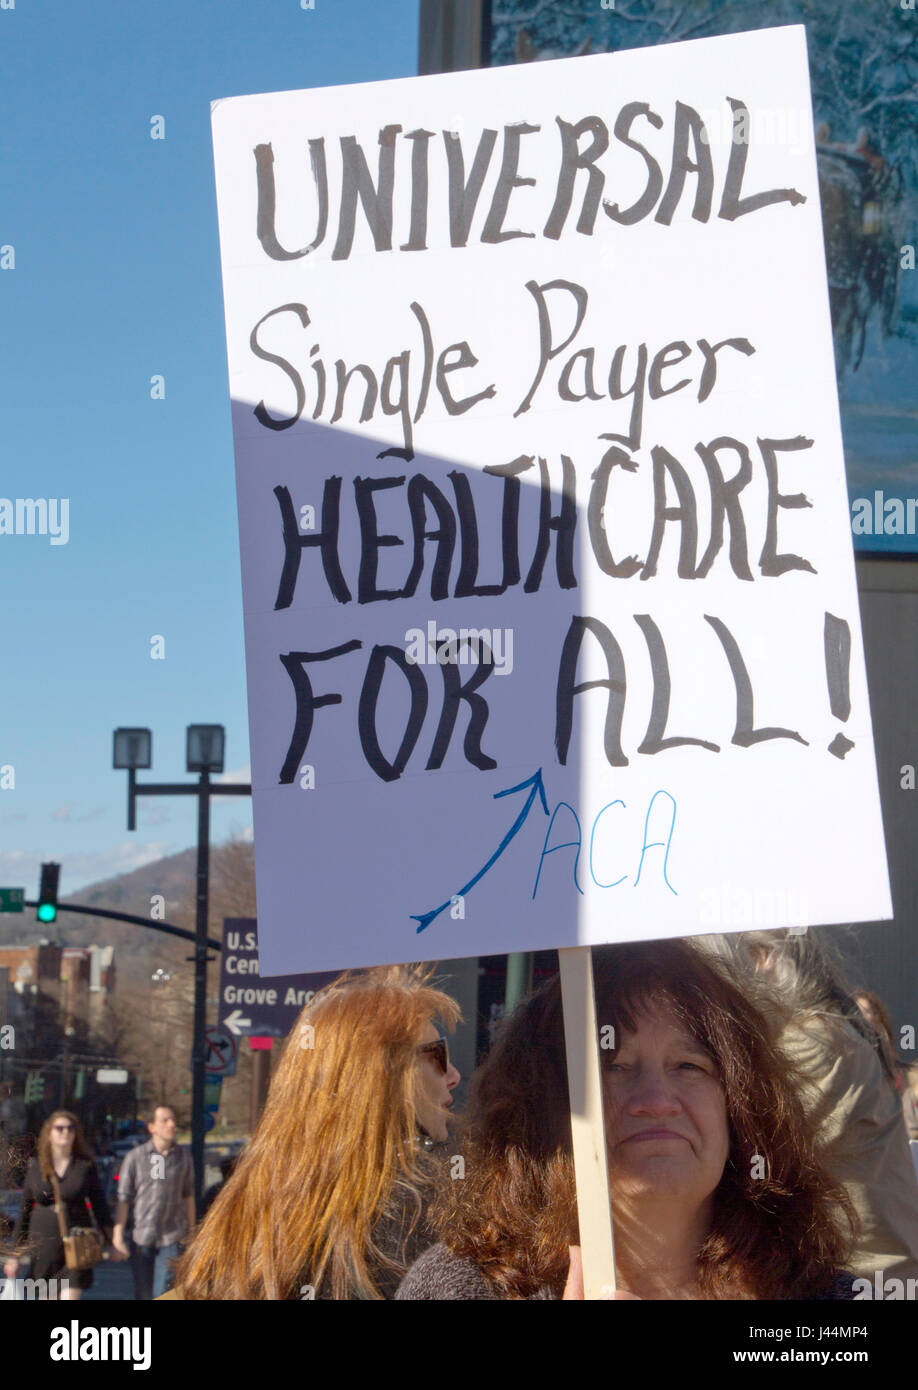 Asheville, North Carolina, USA - February 25, 2017: Woman holds a sign saying 'Universal Single Payer Healthcare For ALL' at an Obamacare (Affordable  Stock Photo